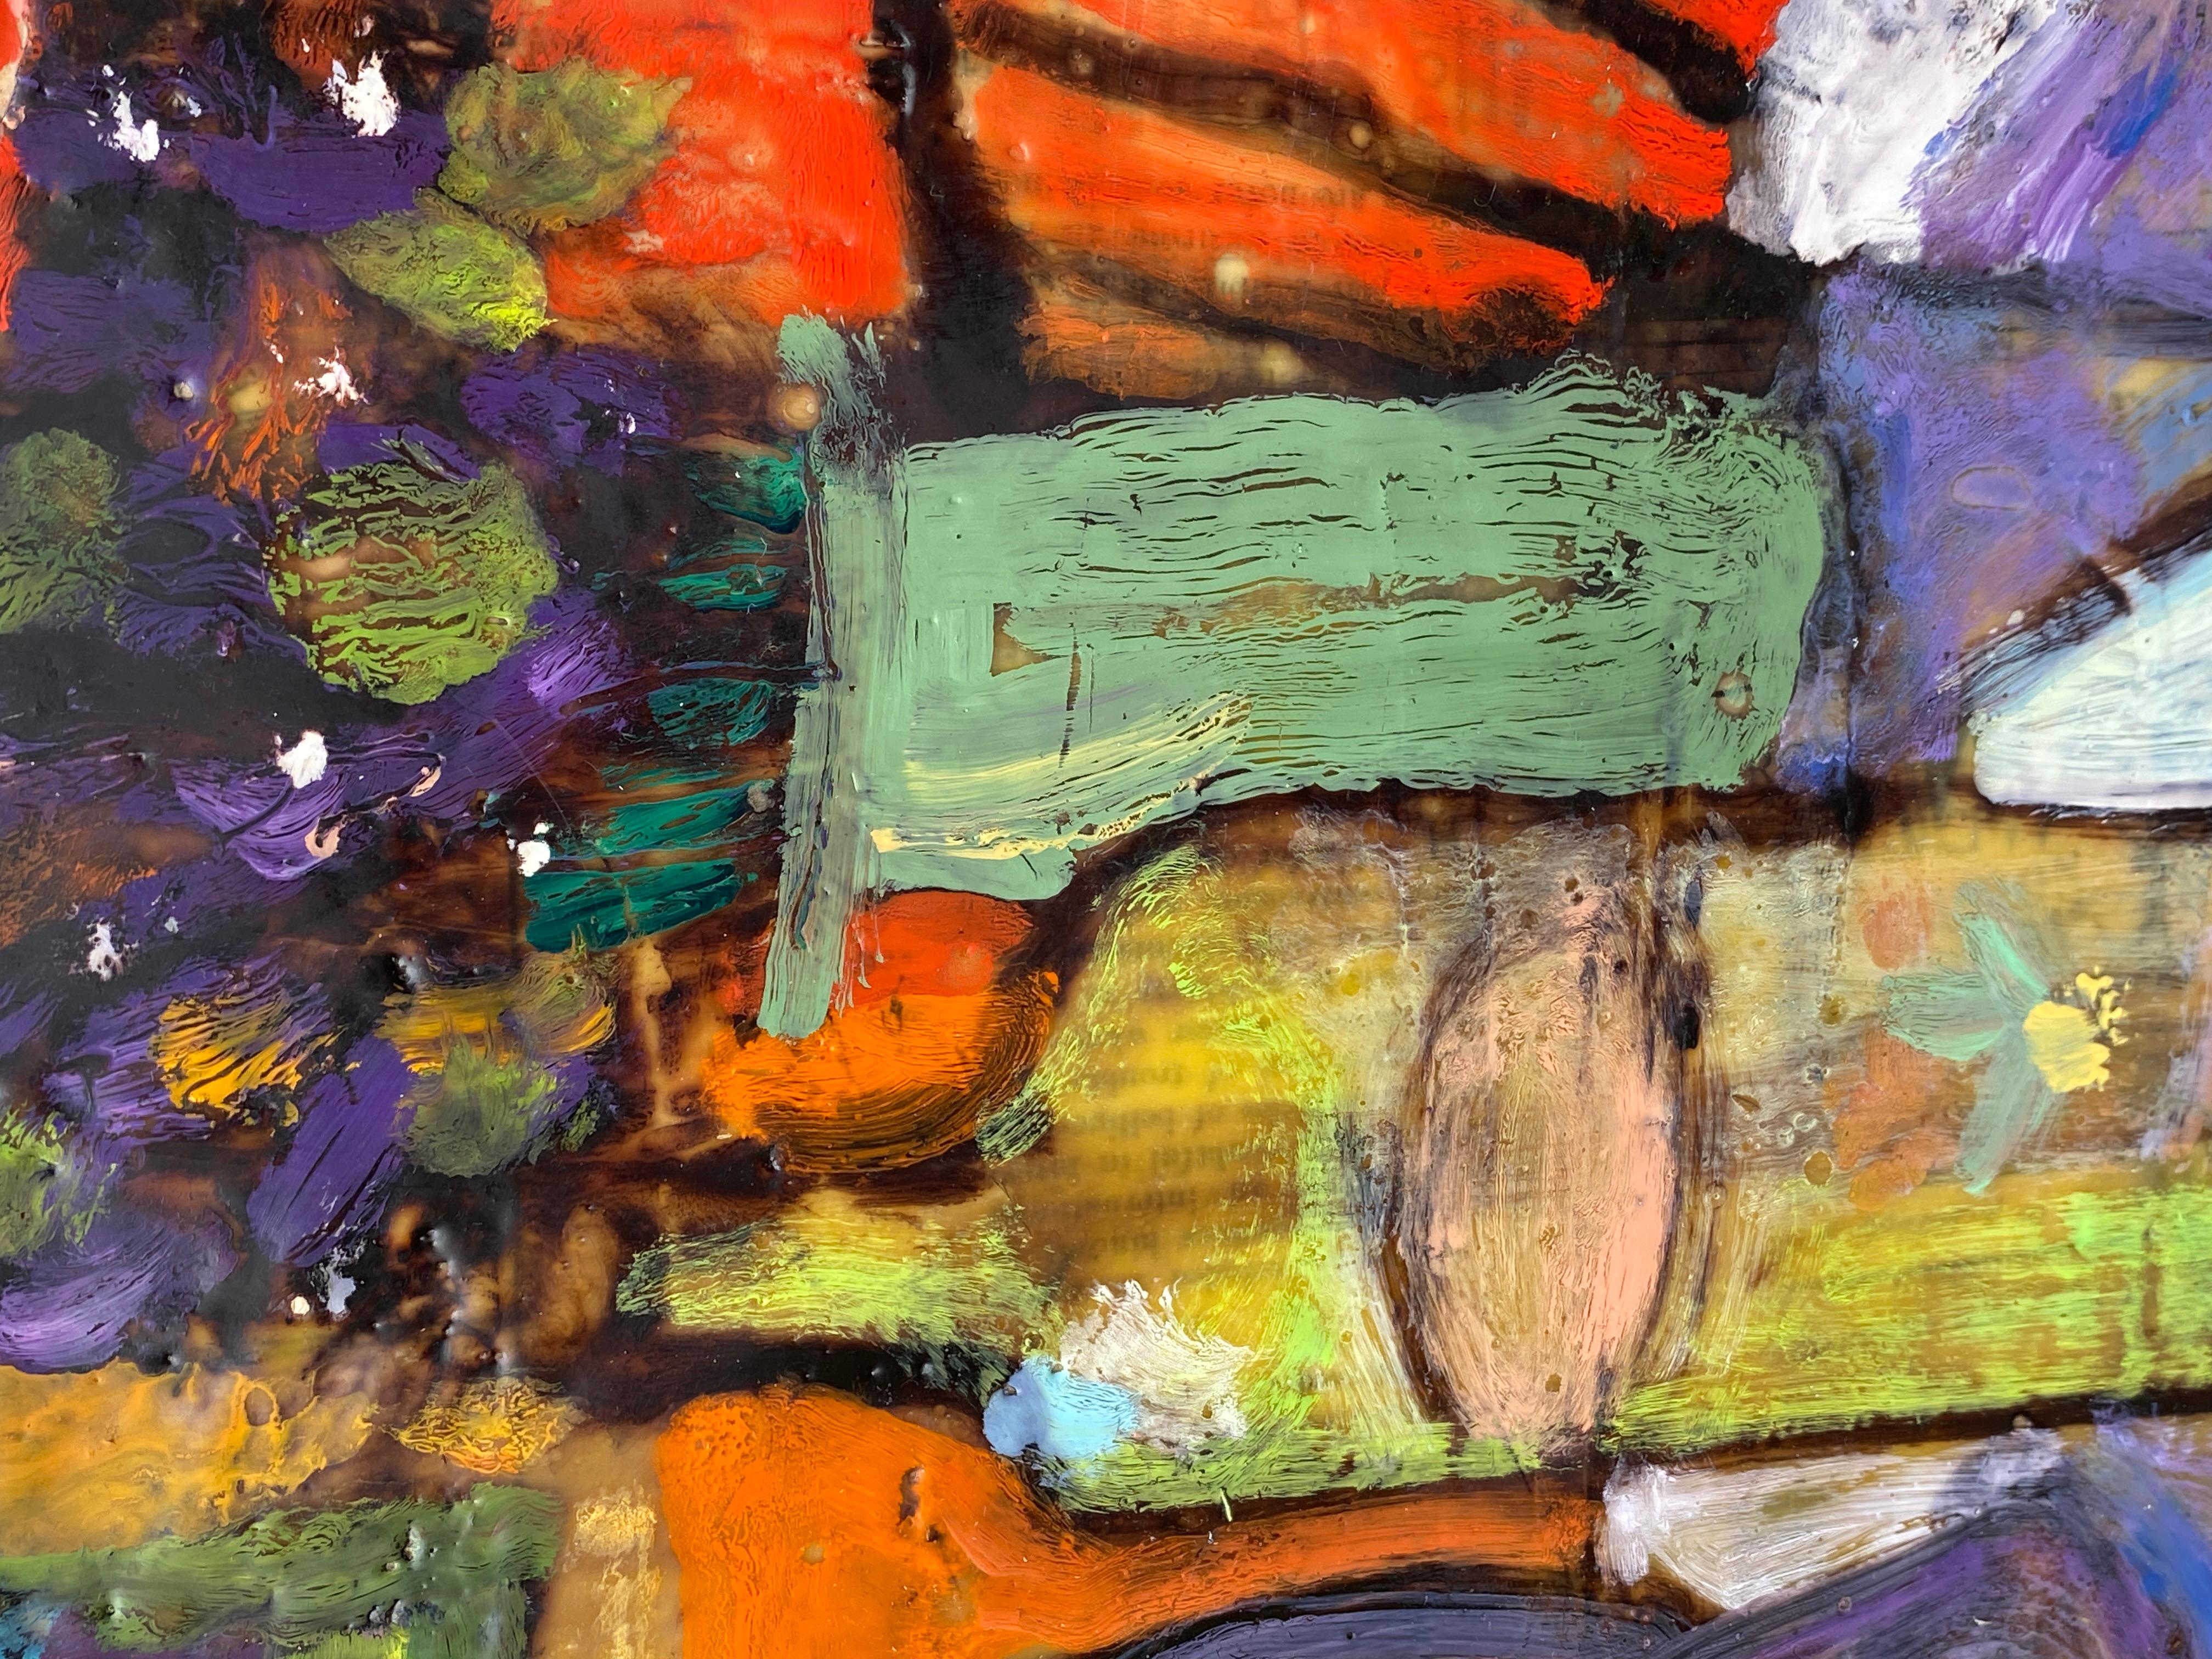 Still Life with Orange, Original Painting - Abstract Expressionist Mixed Media Art by James Hartman